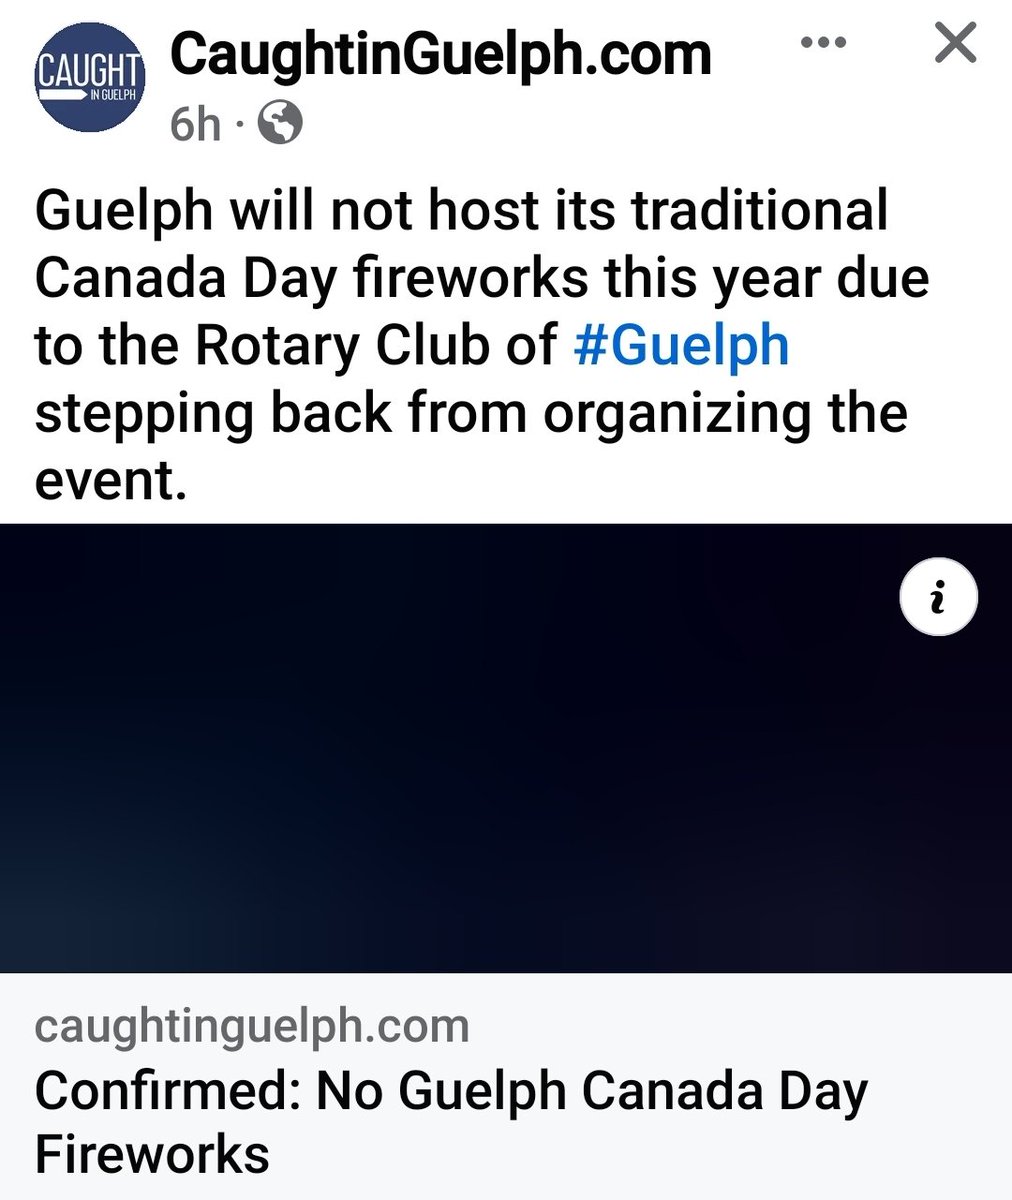 It's official. The City of Guelph hates Canada